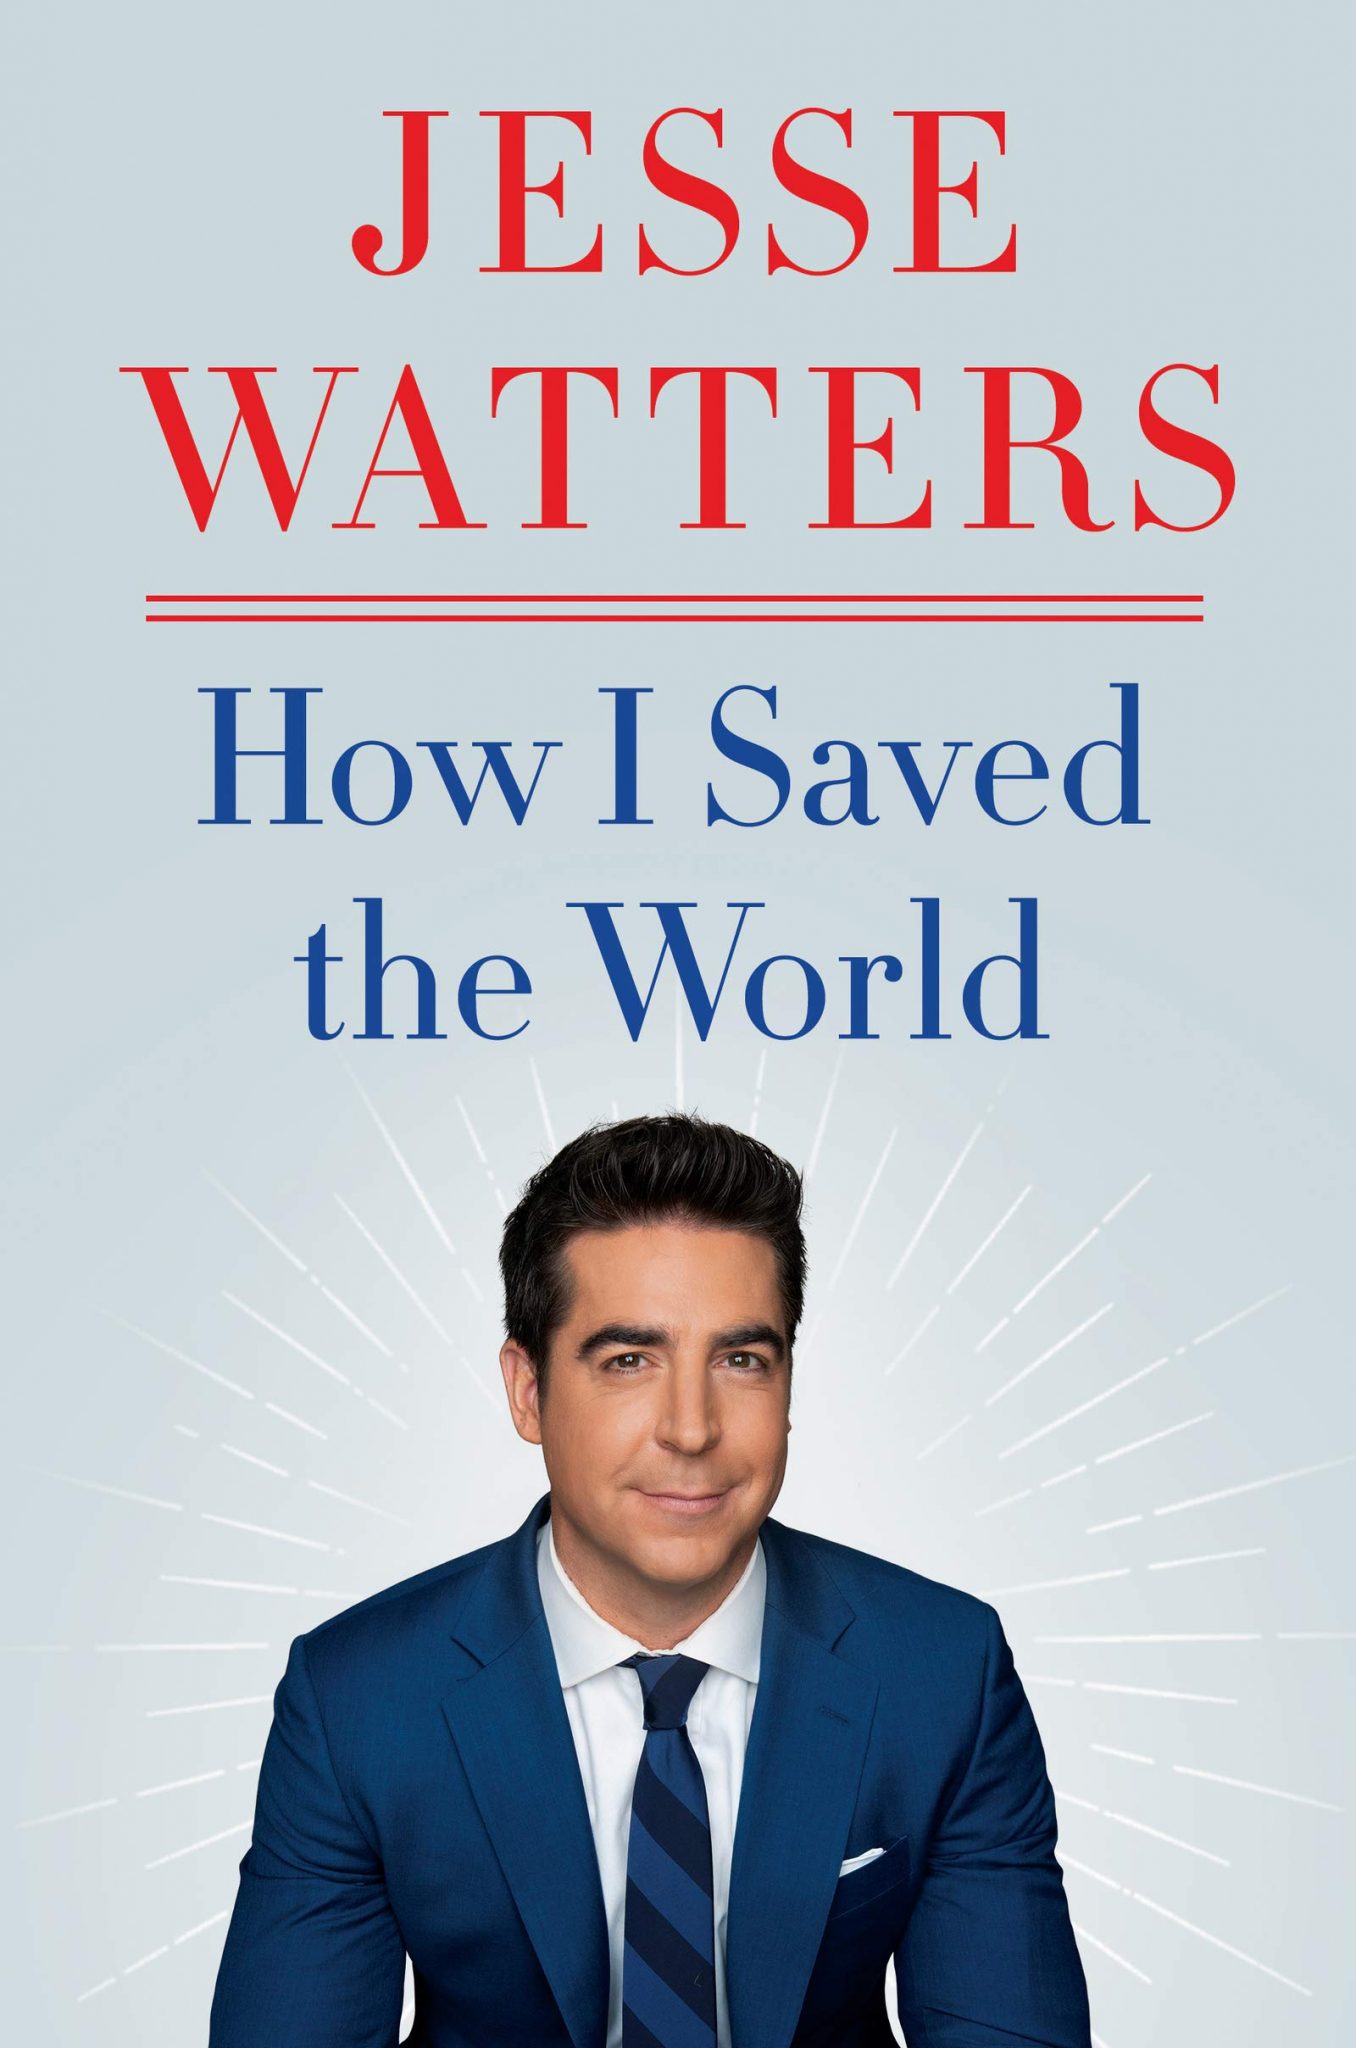 Jesse Watters “How I Saved the World” Author Event Book Signing Central